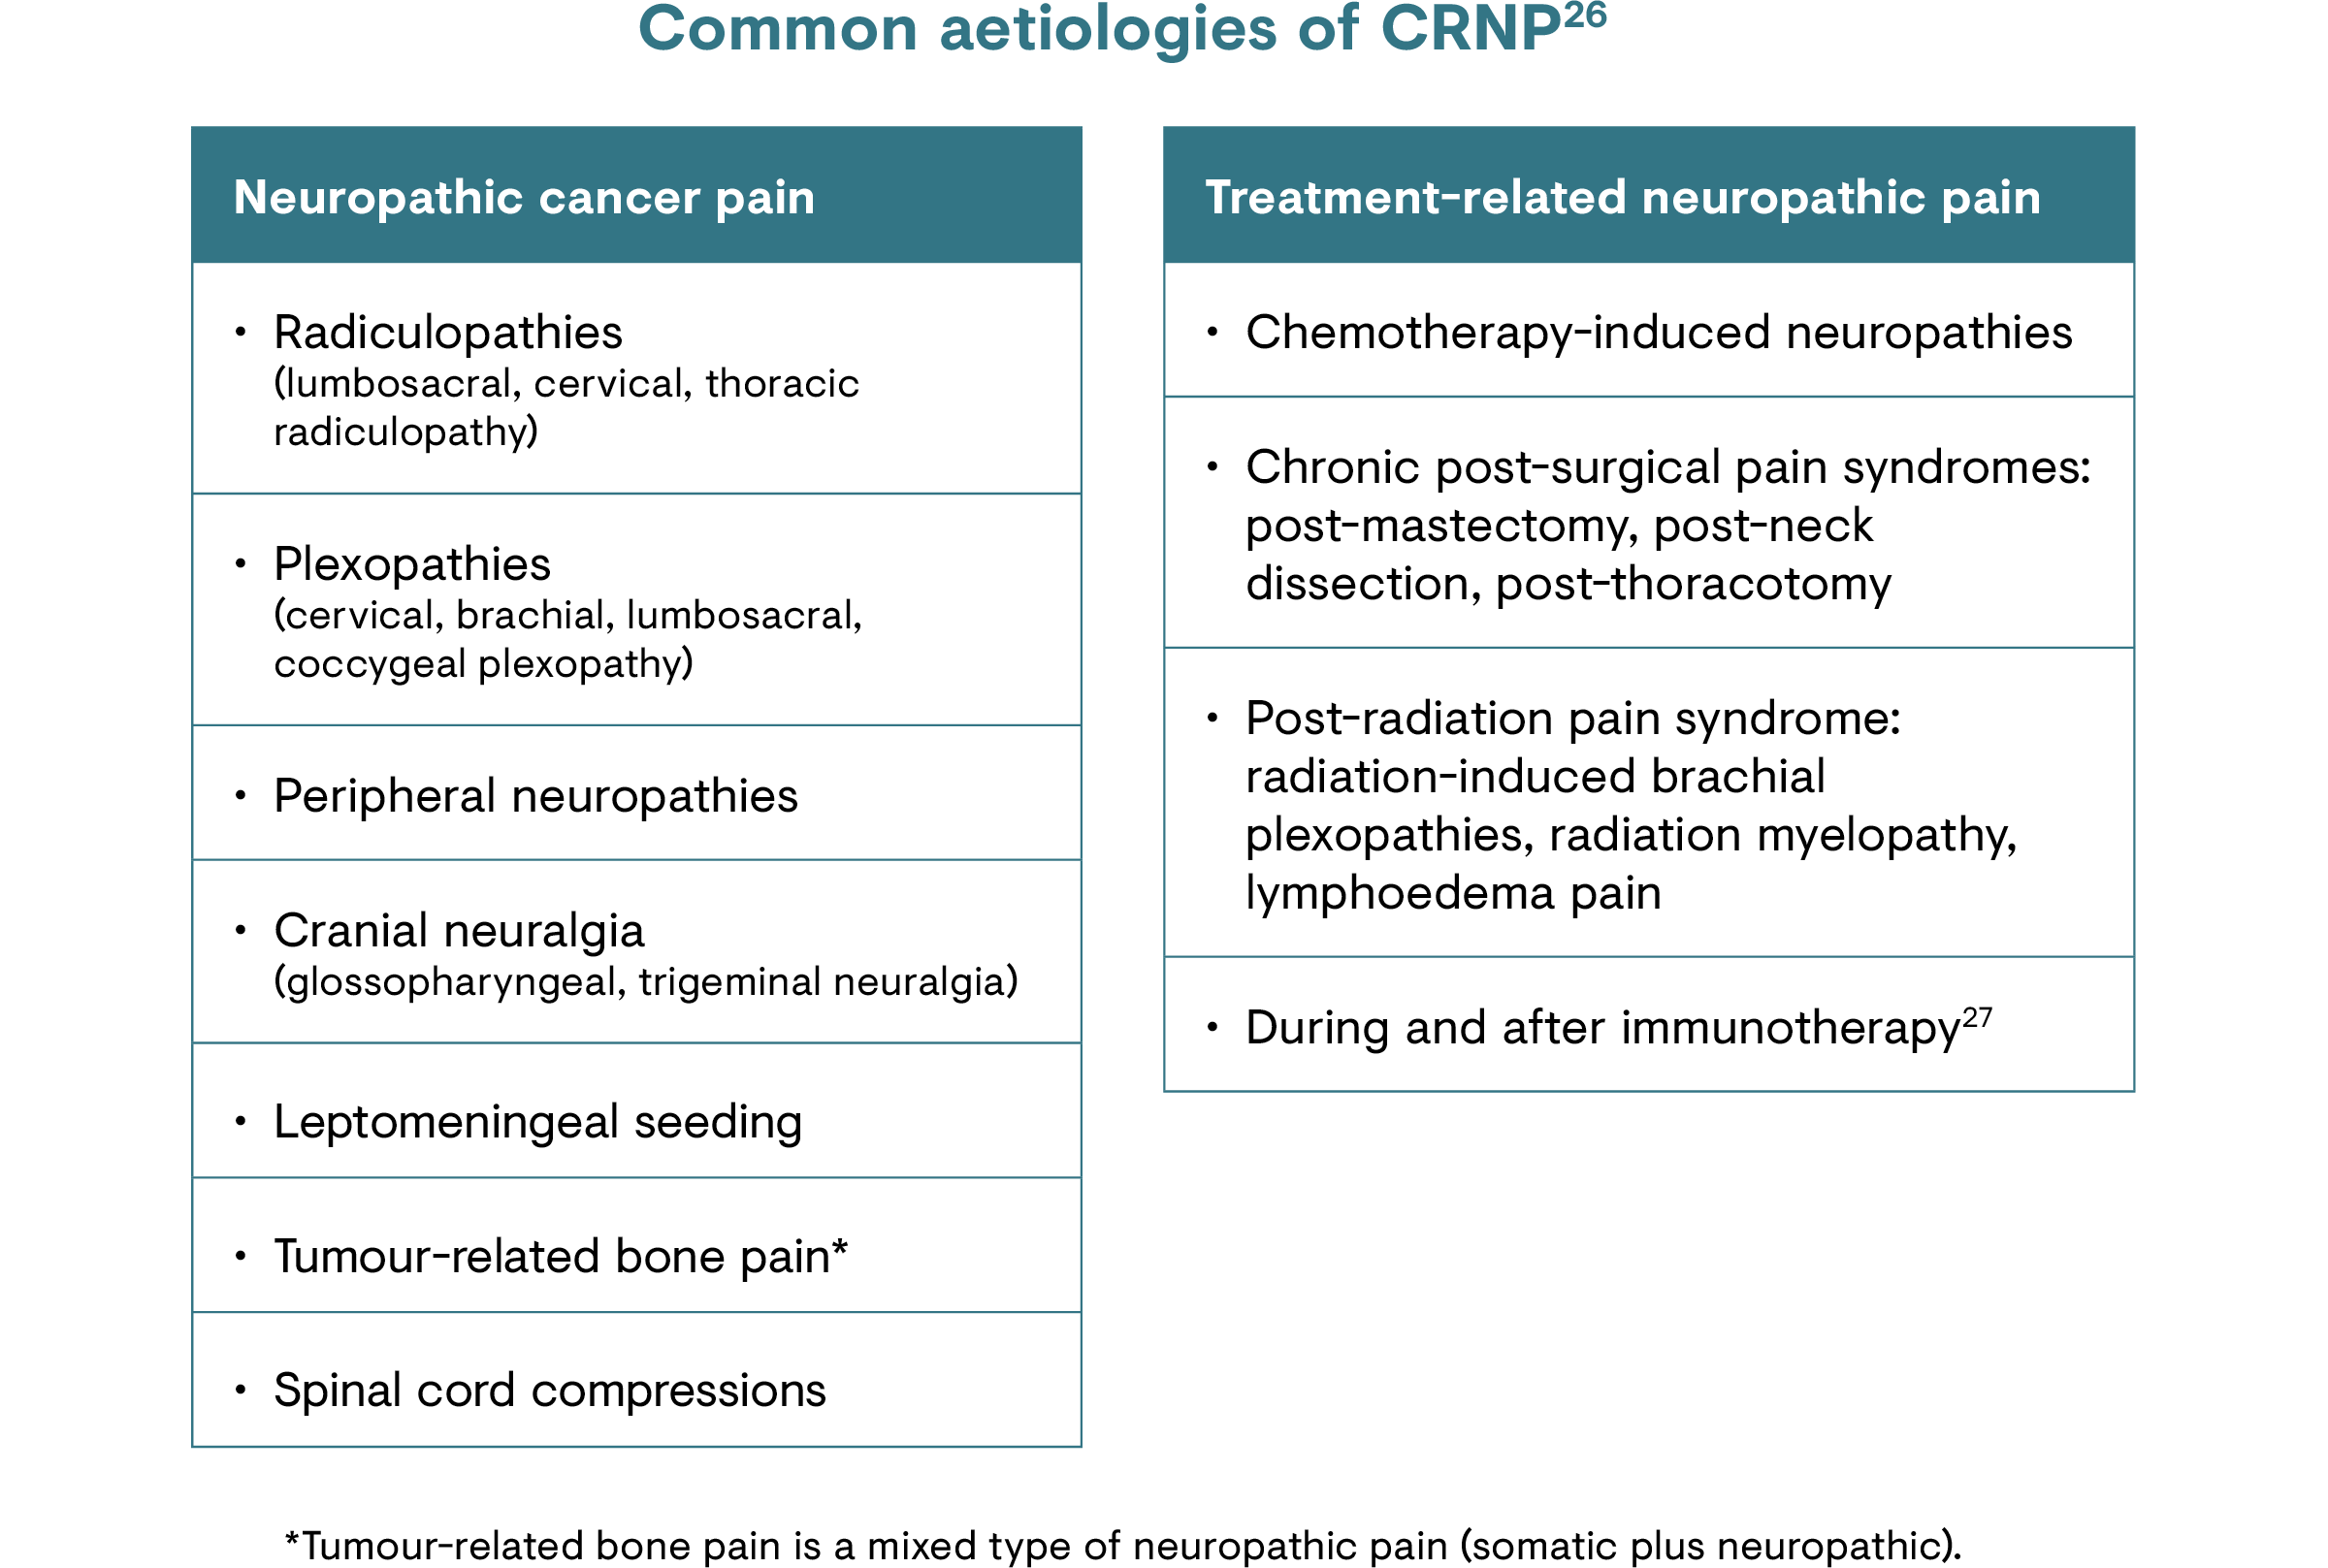 List of common aetiologies of cancer-related neuropathic pain including chemotherapy-induced peripheral neuropathy (CIPN).